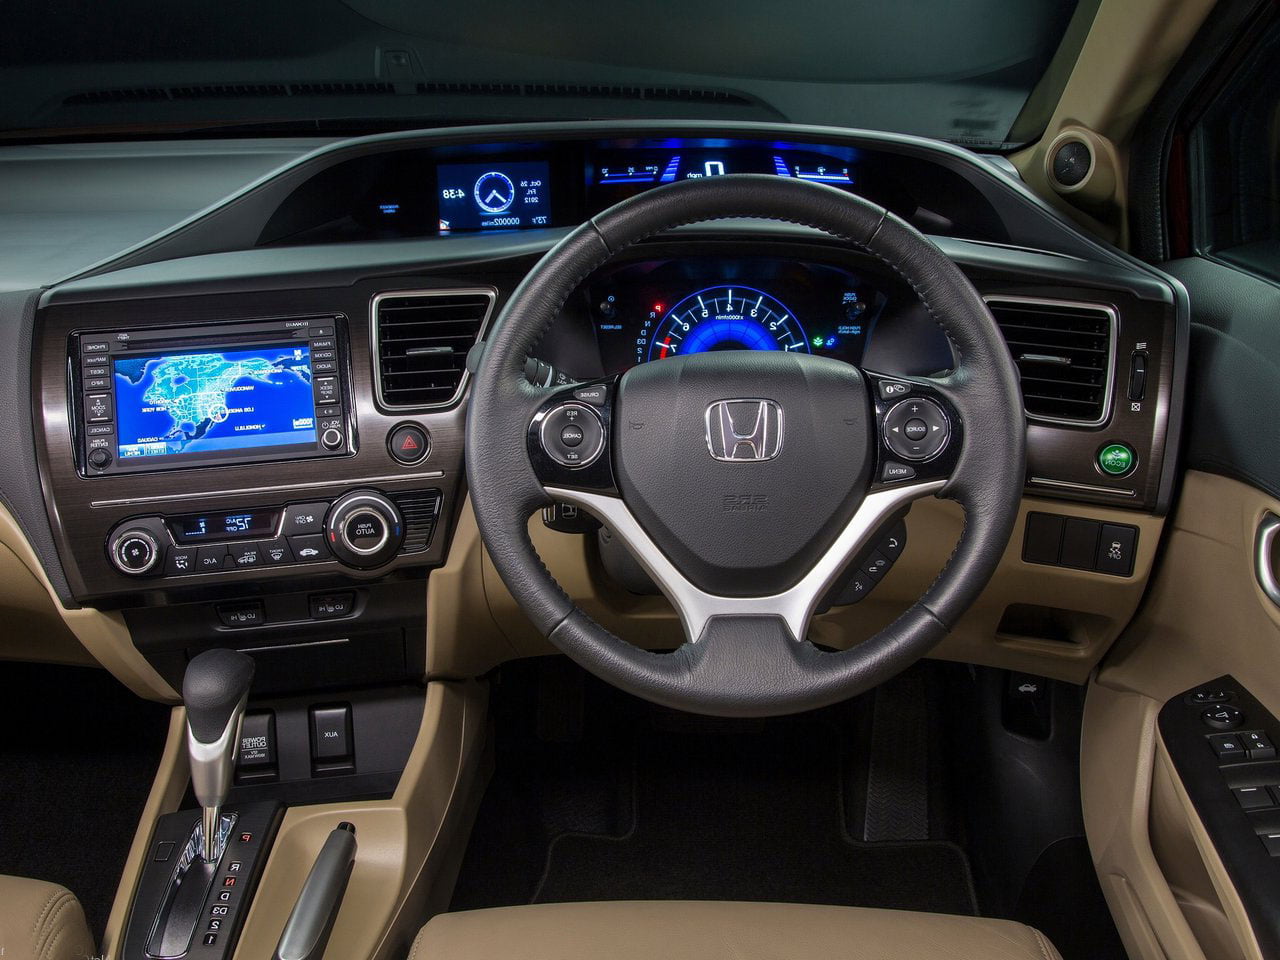 Honda Civic Model 2014 Pictures Photos Gallery In Hd